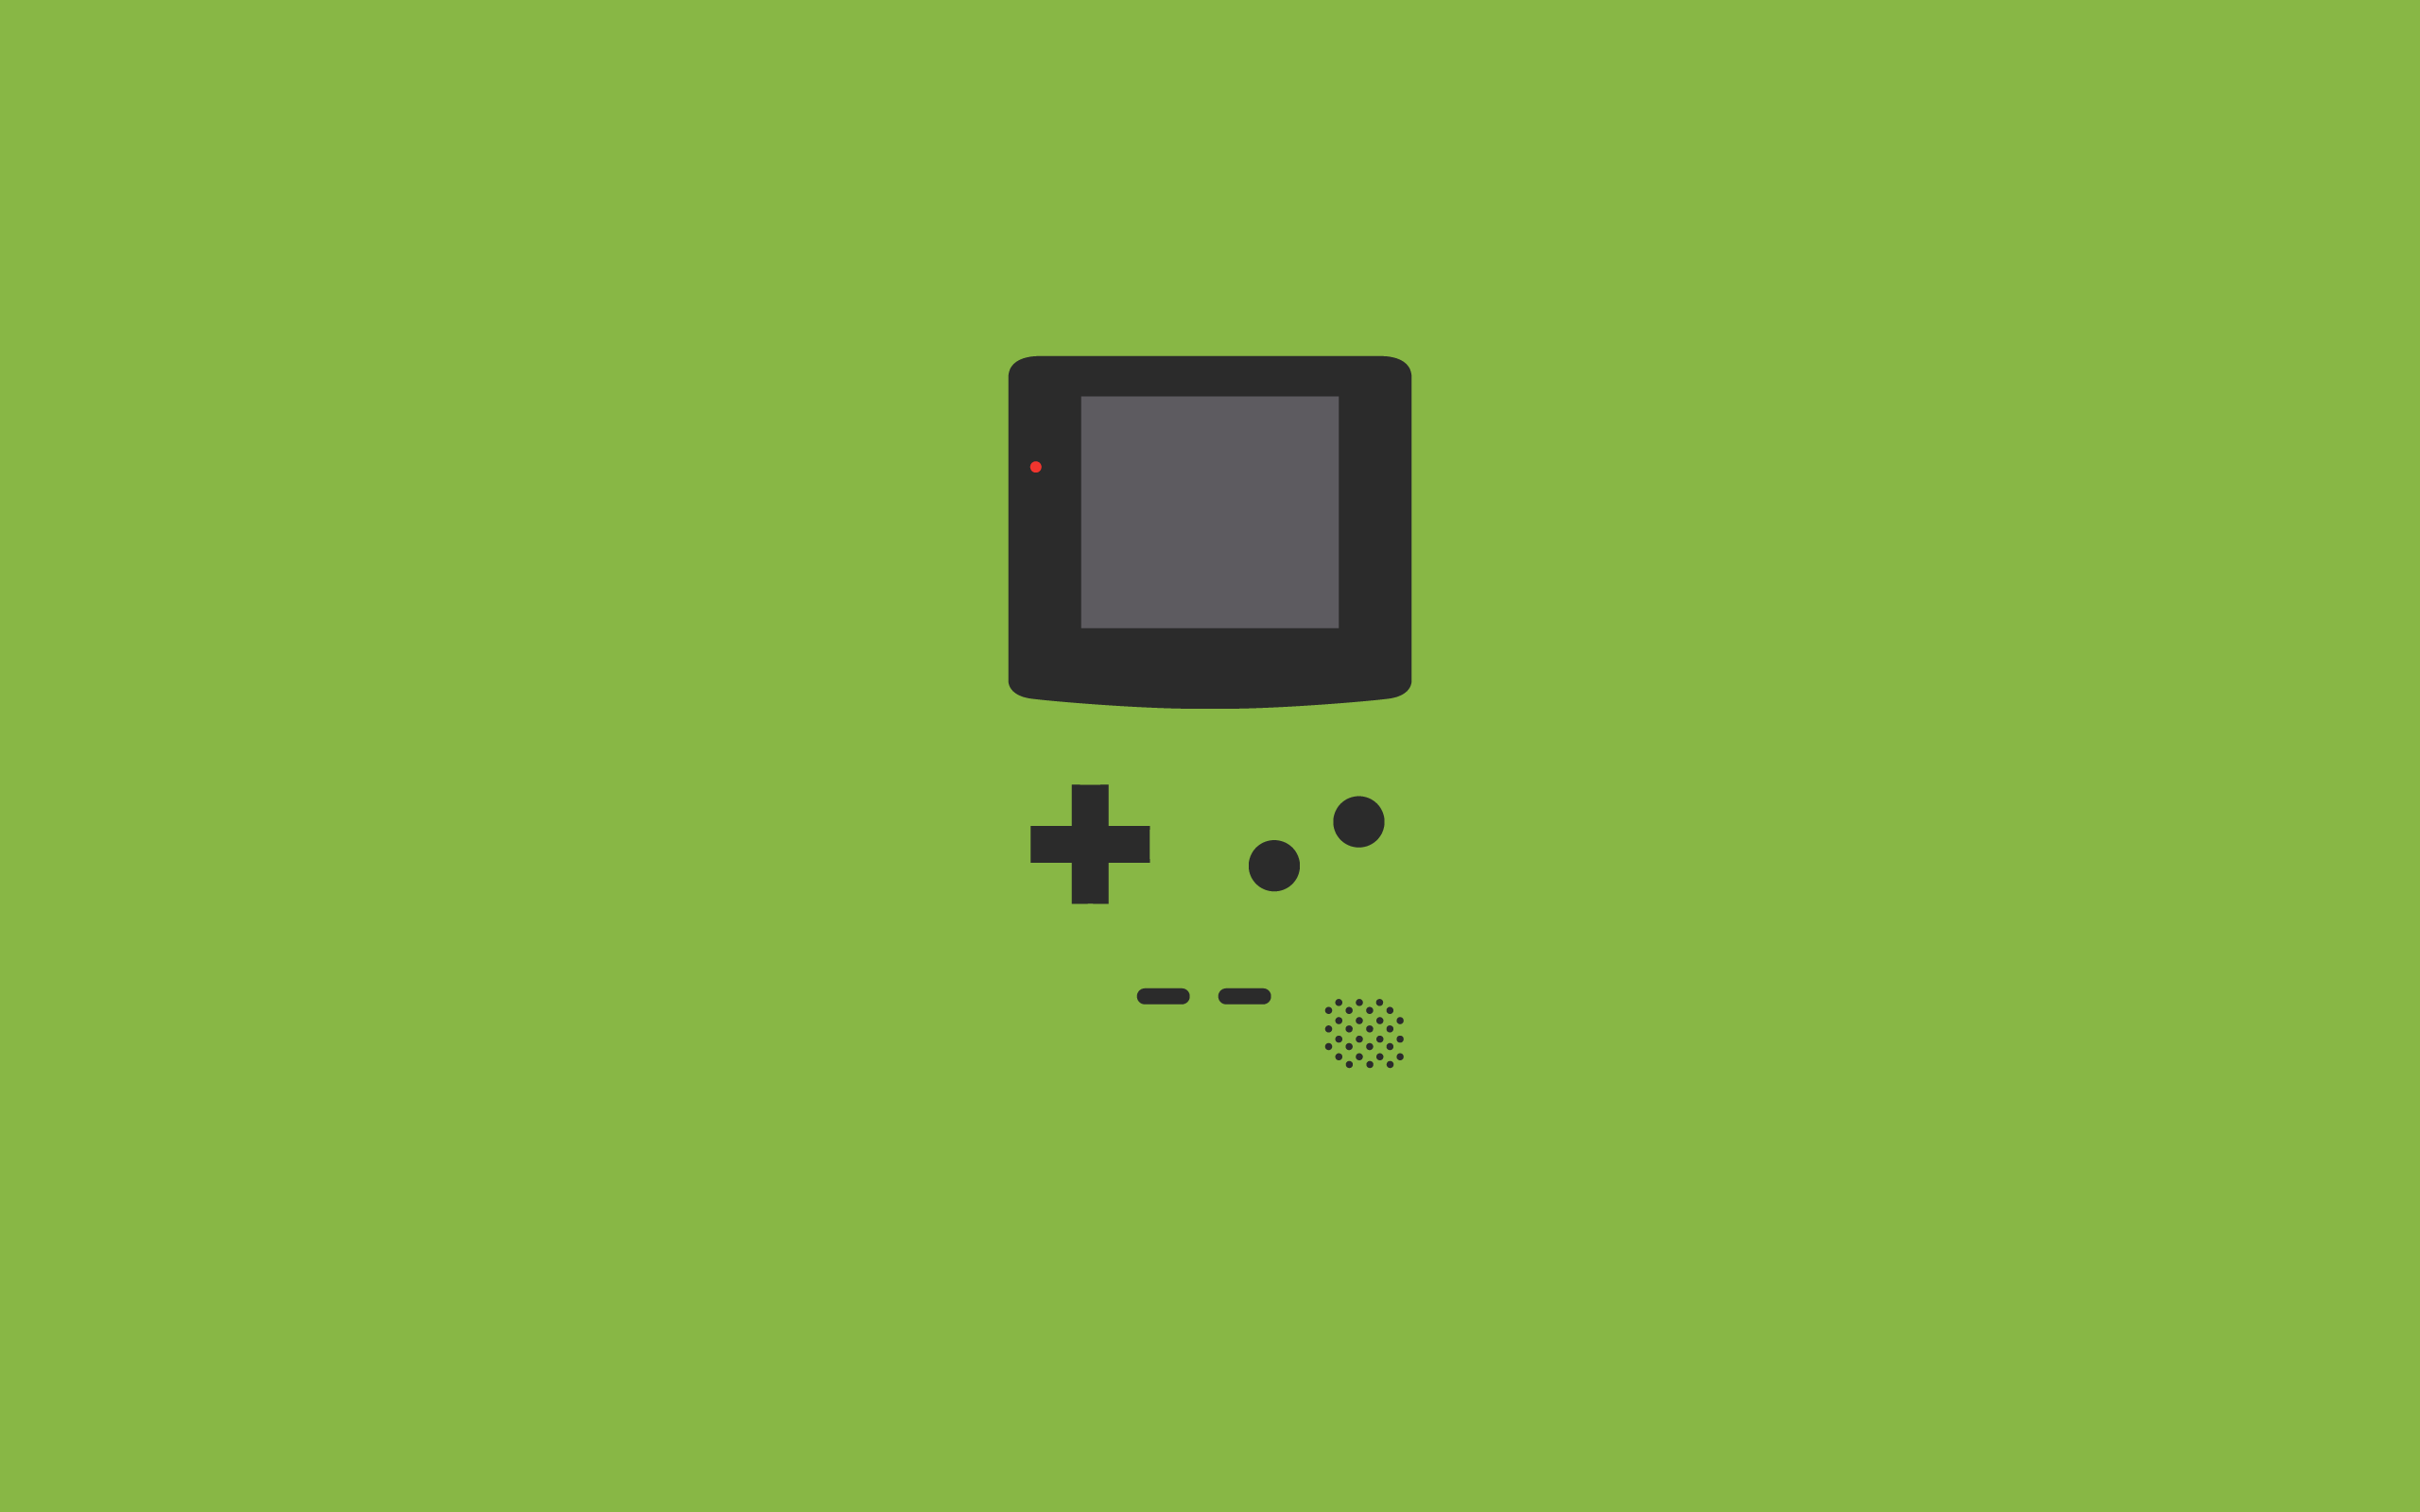 Minimalism GameBoy Color Video Games Video Game Art Green Background Simple Background Green 2560x1600